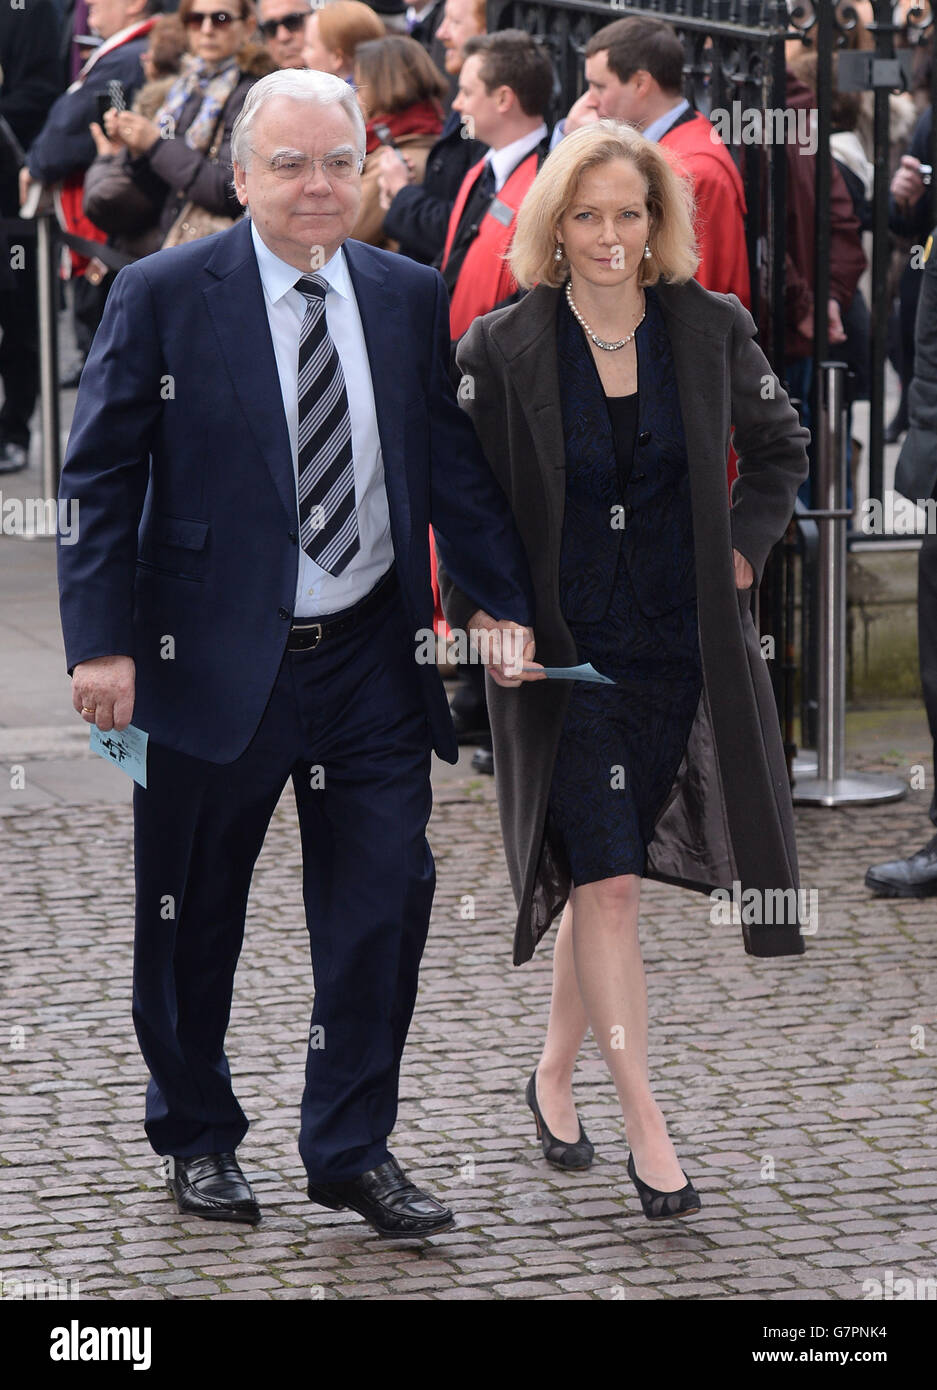 Bill Kenwright and Jenny Seagrove arrive at Westminster Abbey in London for the memorial service of Lord Richard Attenborough, who died last year. Stock Photo